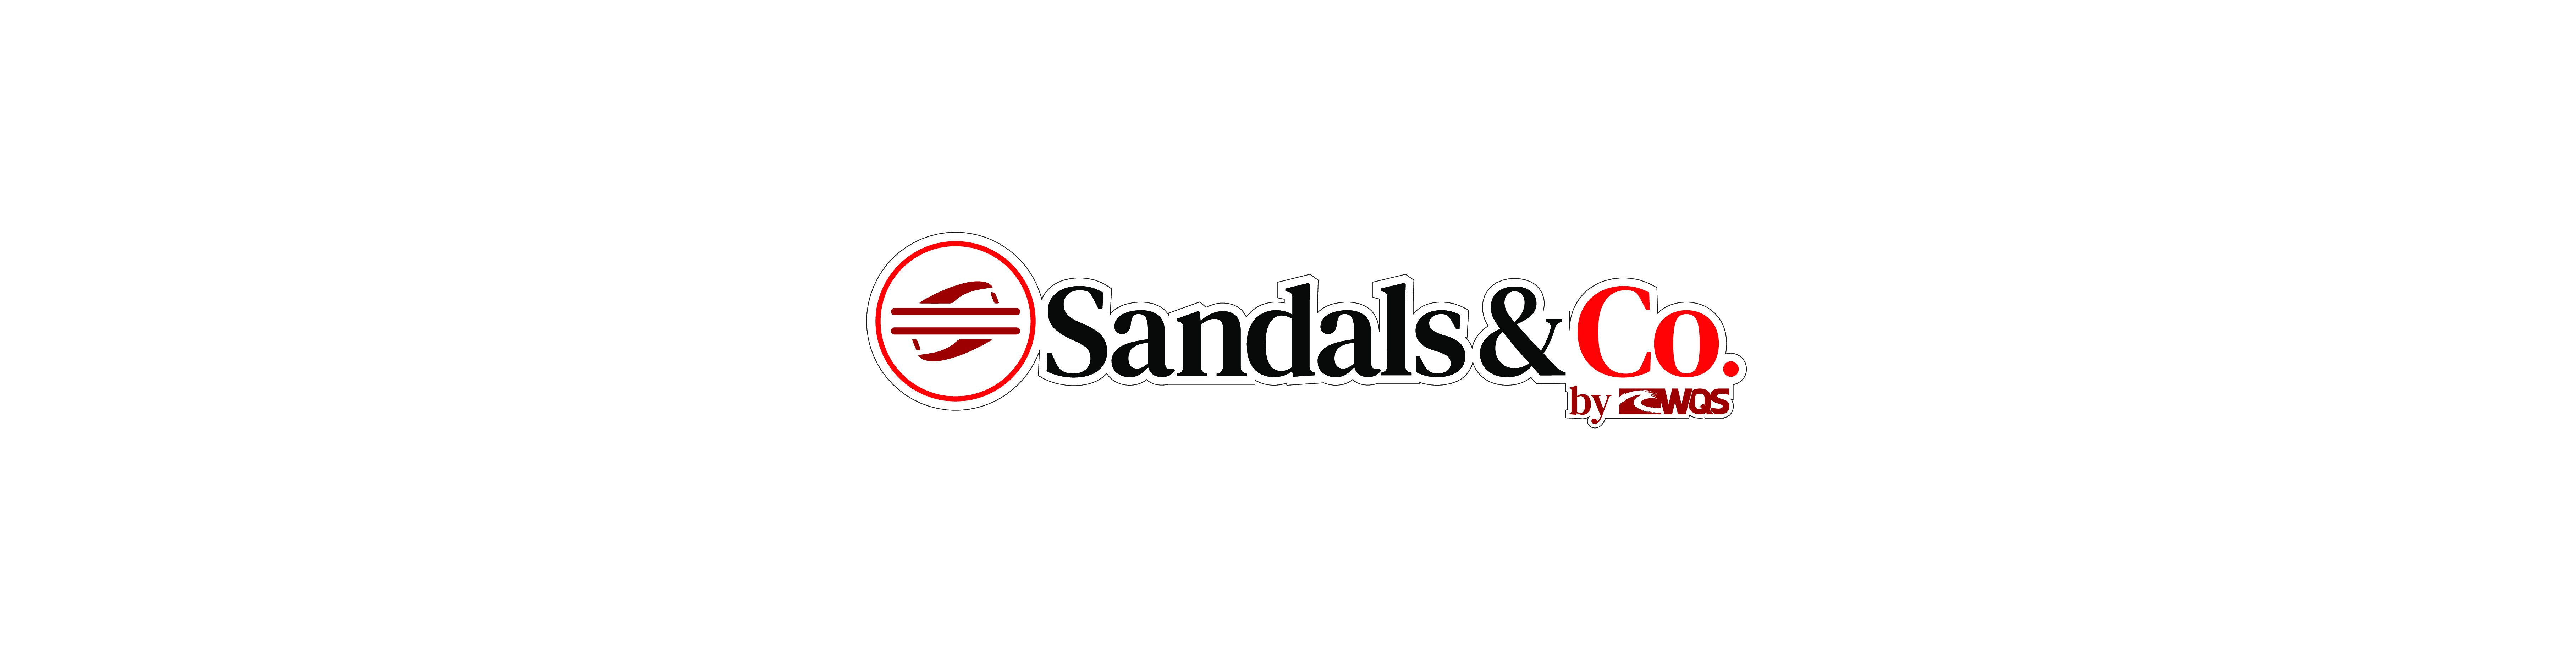 Logo Sandals&Co by WQS